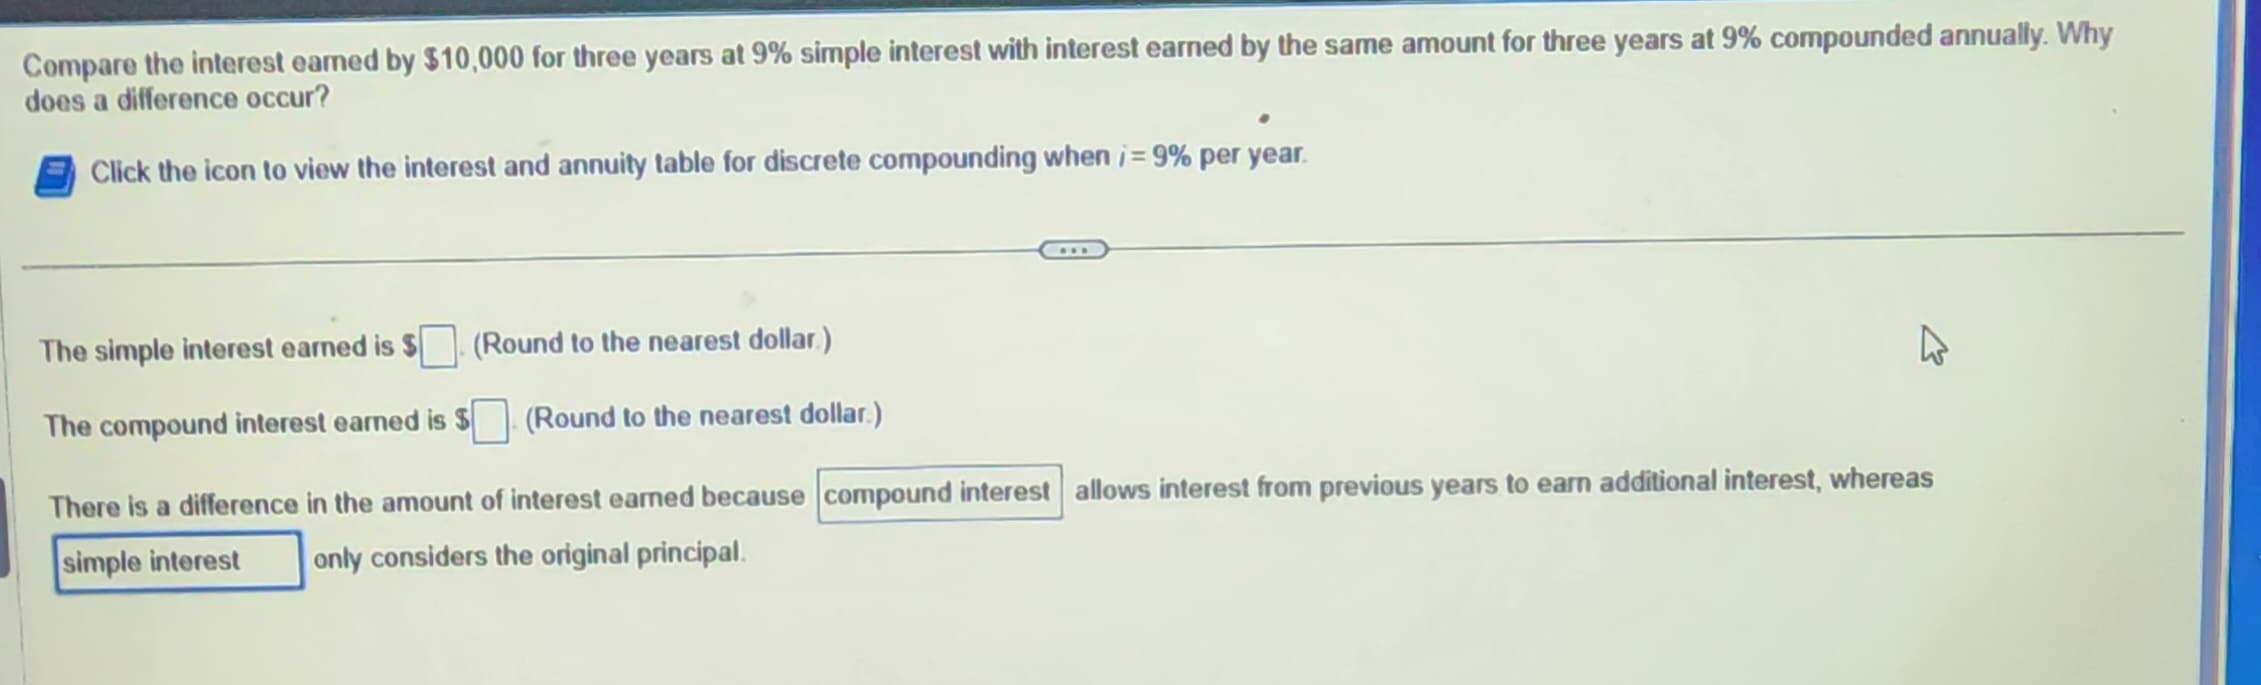 Compare the interest earned by $10,000 for three years at 9% simple interest with interest earned by the same amount for three years at 9% compounded annually. Why
does a difference occur?
Click the icon to view the interest and annuity table for discrete compounding when i=9% per year.
The simple interest earned is
(Round to the nearest dollar.)
(Round to the nearest dollar.)
The compound interest earned is $
There is a difference in the amount of interest earned because compound interest allows interest from previous years to earn additional interest, whereas
simple interest
only considers the original principal.